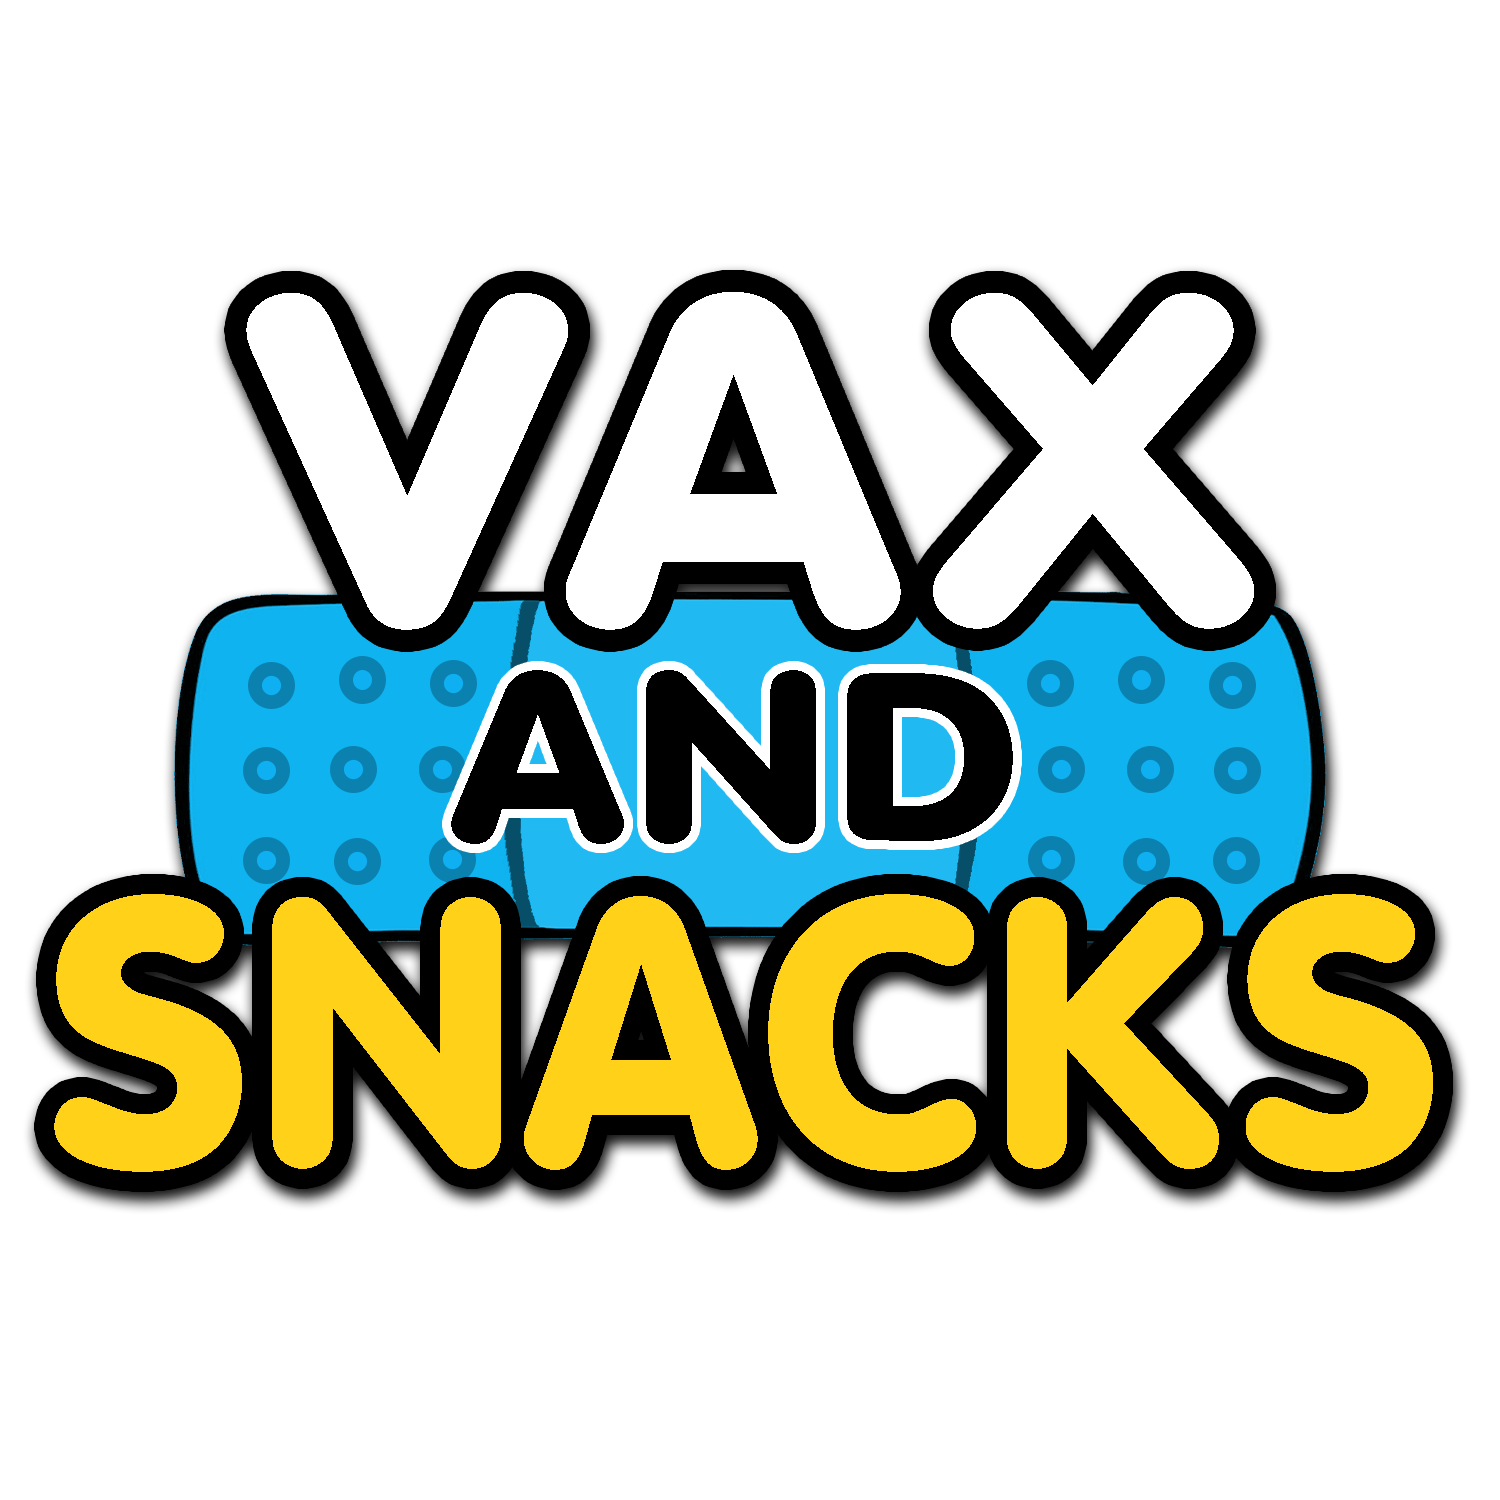 Vax and Snacks